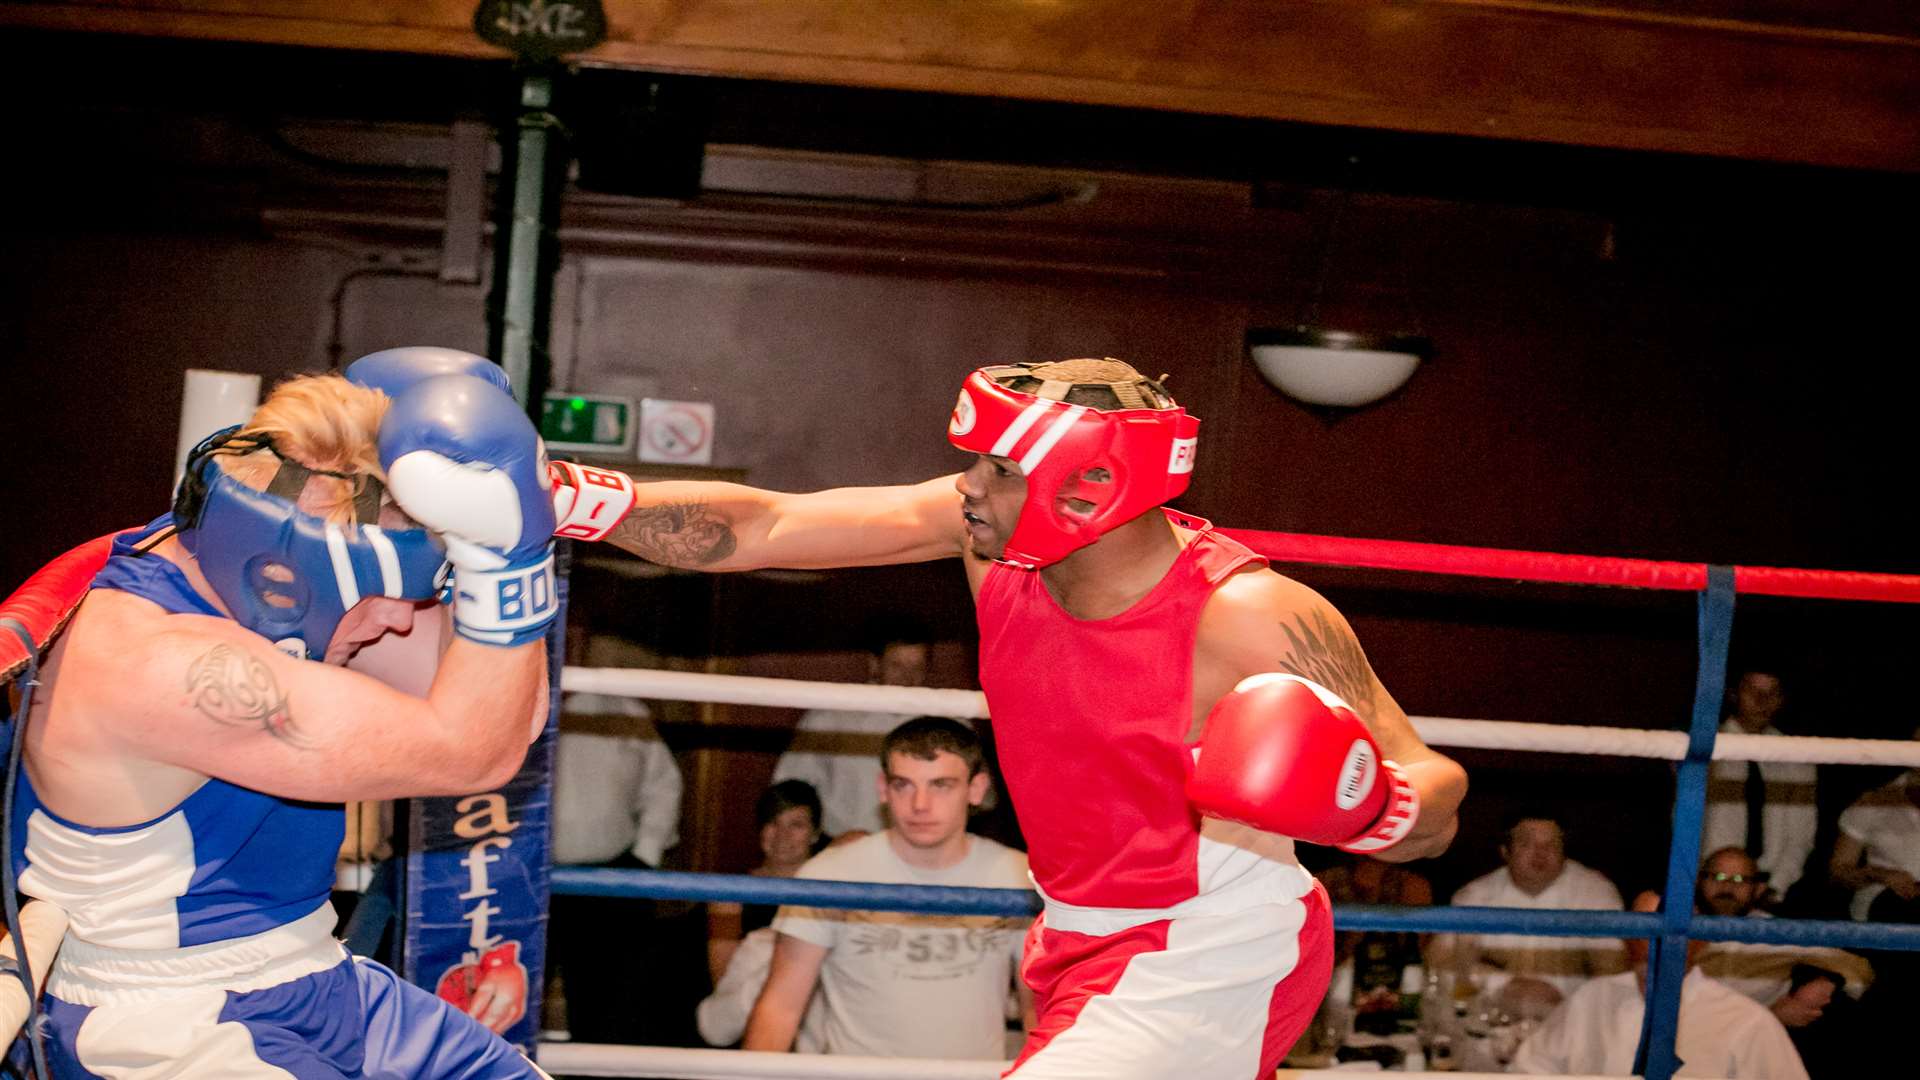 The 90 second bouts were watched by hundreds of spectators